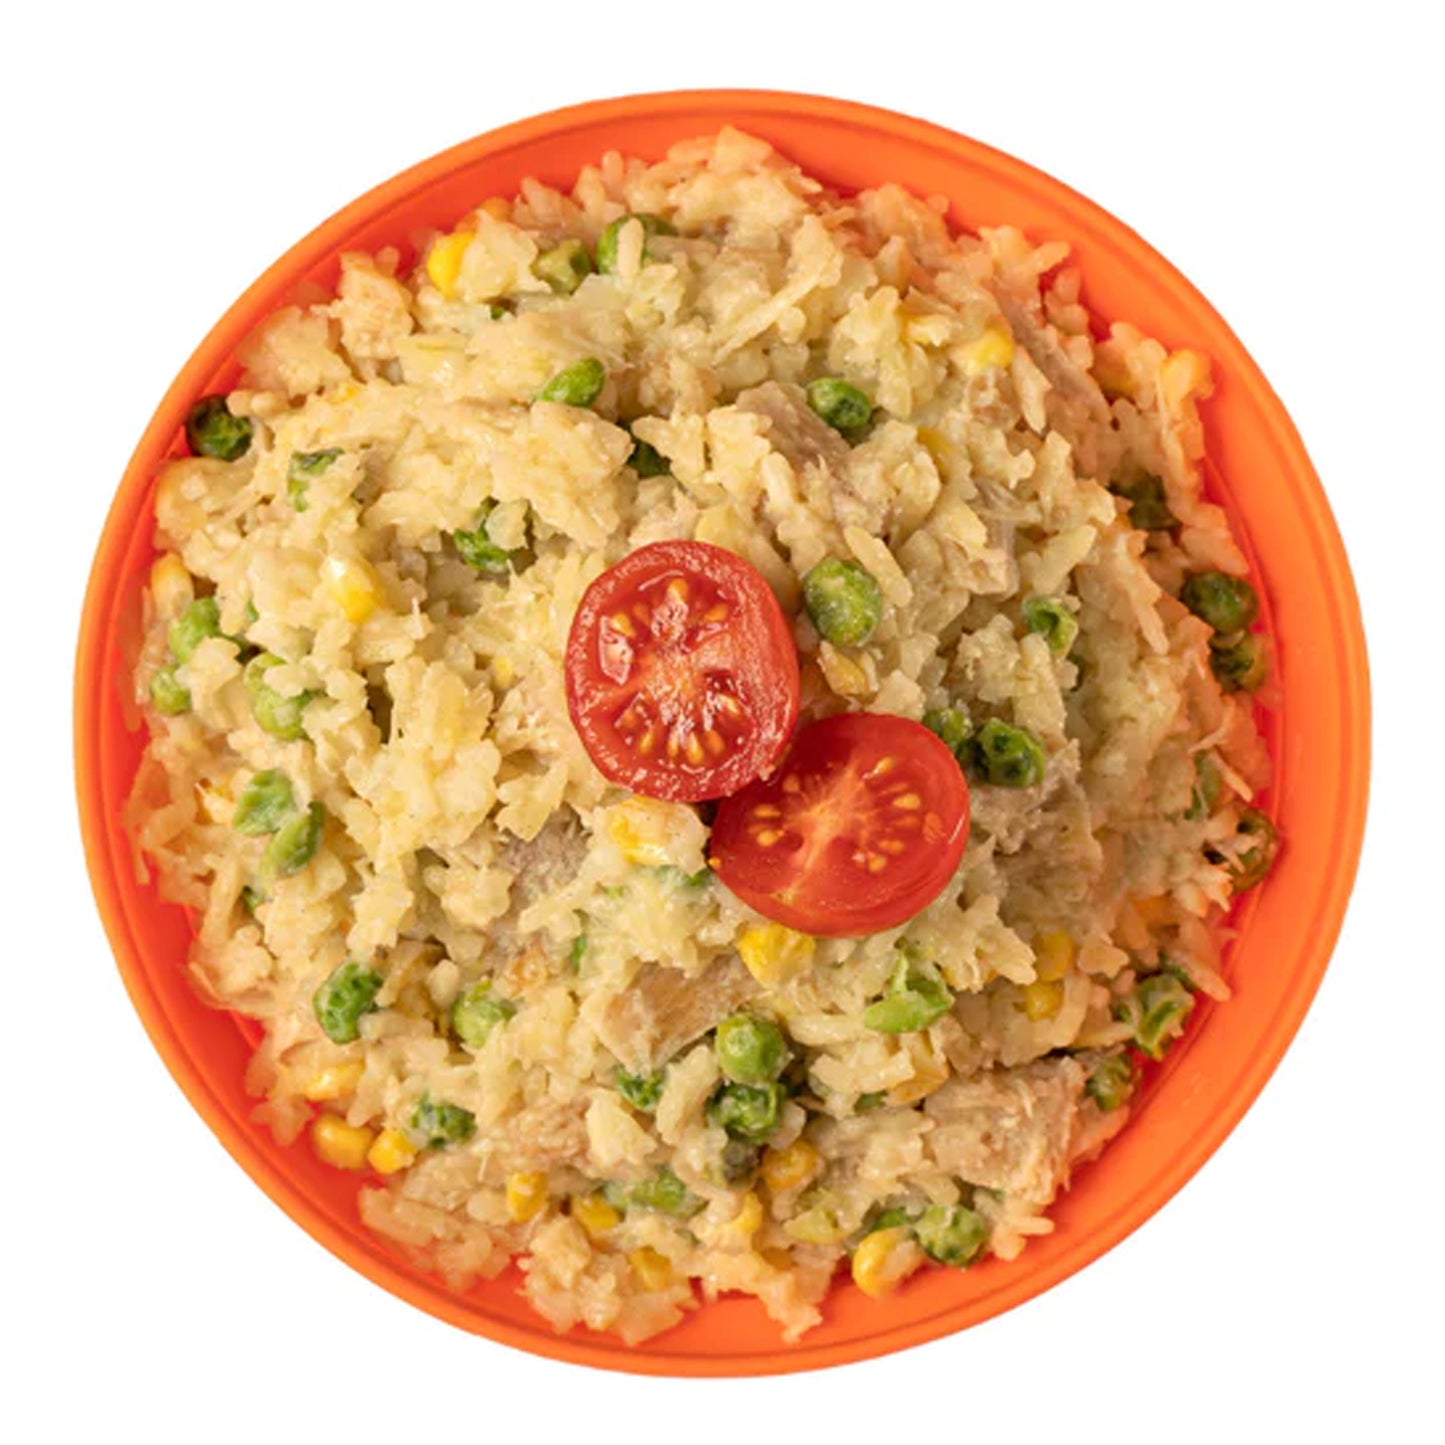 Expedition Foods Chicken with Rice and Vegetables Meal